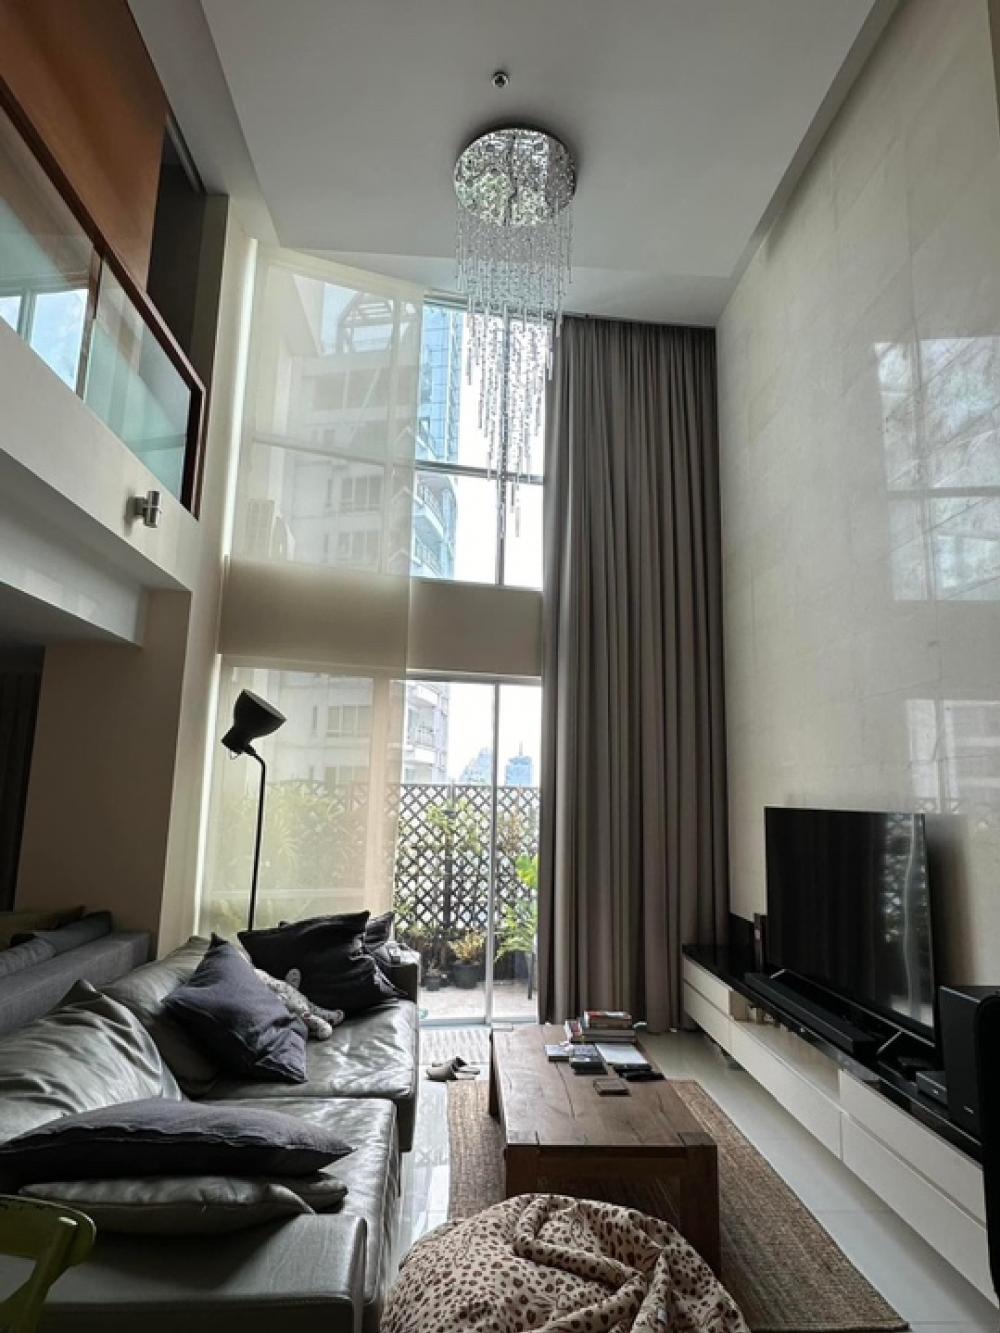 For SaleCondoWitthayu, Chidlom, Langsuan, Ploenchit : 📢👇Good deal for rent / sale lease hold til May 2039, 1 bed DUPLEX (able to make 2 beds), unblocked view of city and Royal sport club, fully furnished, ready to move in